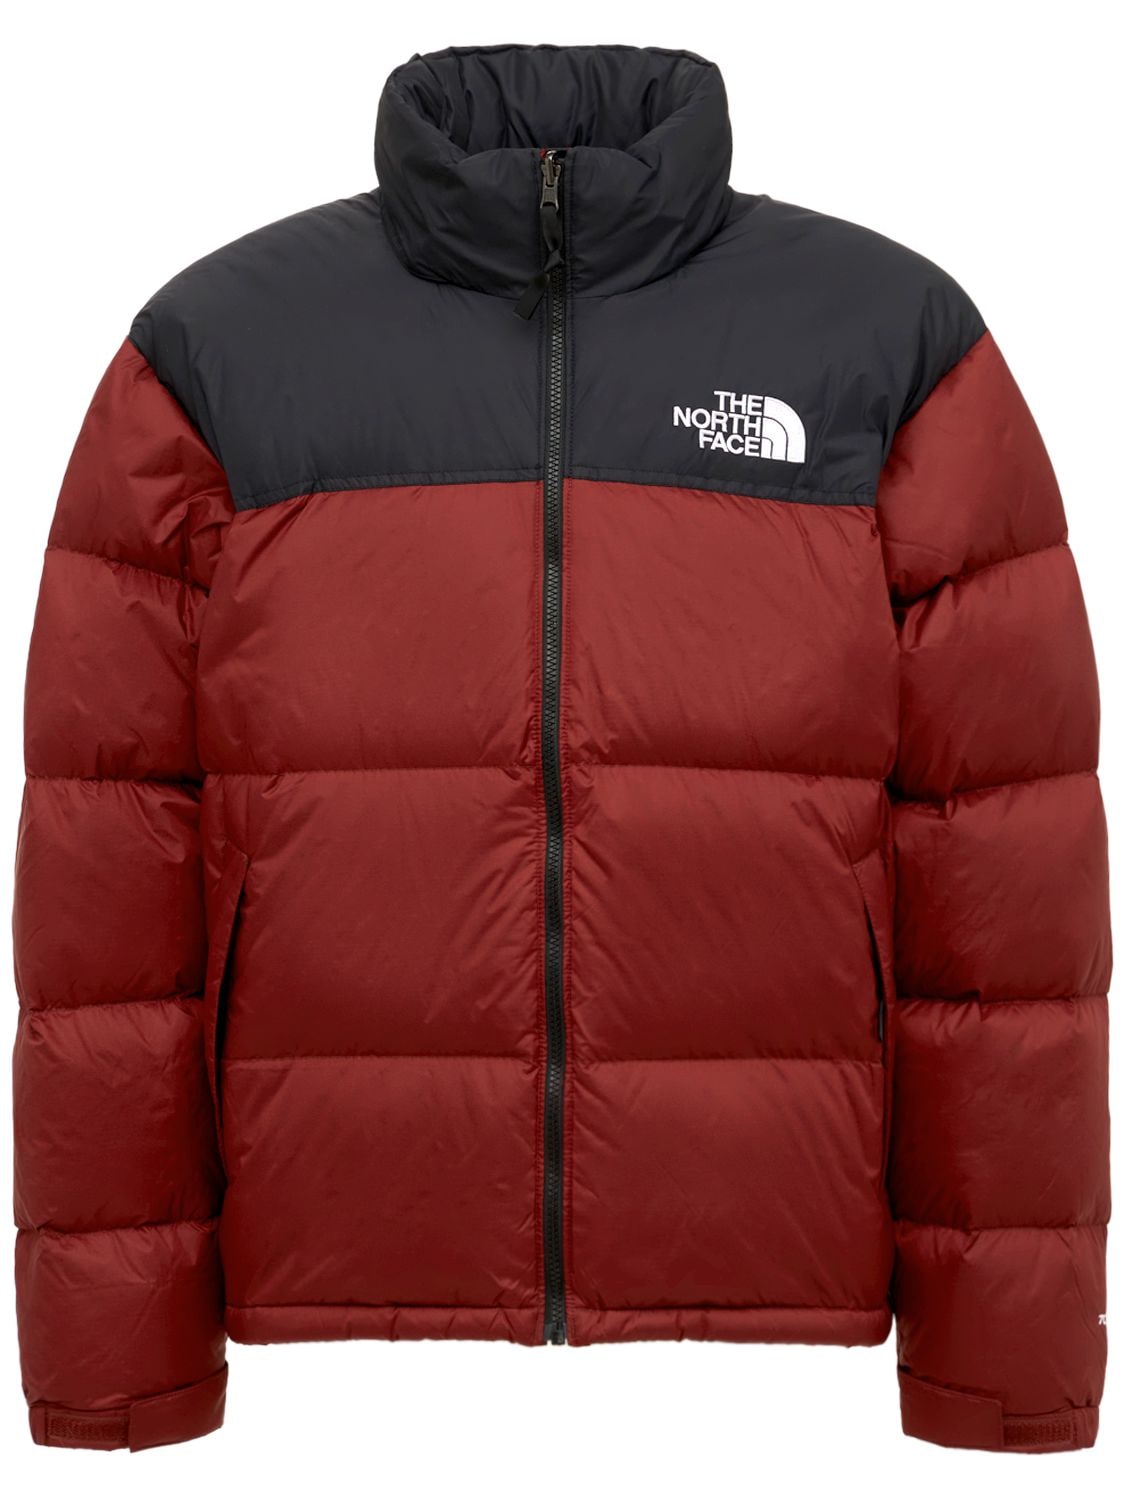 The North Face 1996 Retro Nuptse Down Jacket In Brick House Red